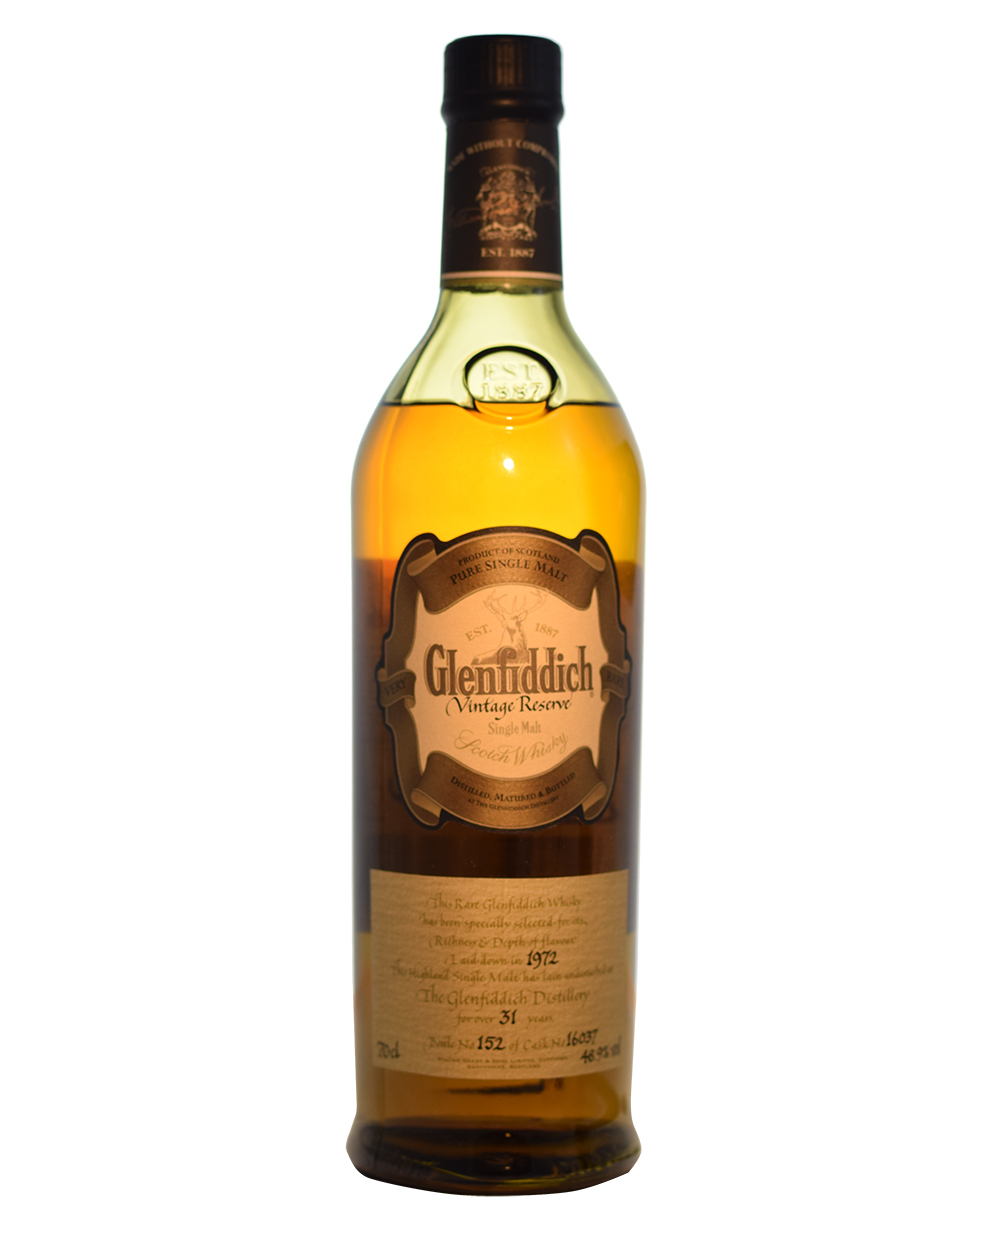 Glenfiddich 1972 Vintage Reserve (31 Years Old) Musthave Malts